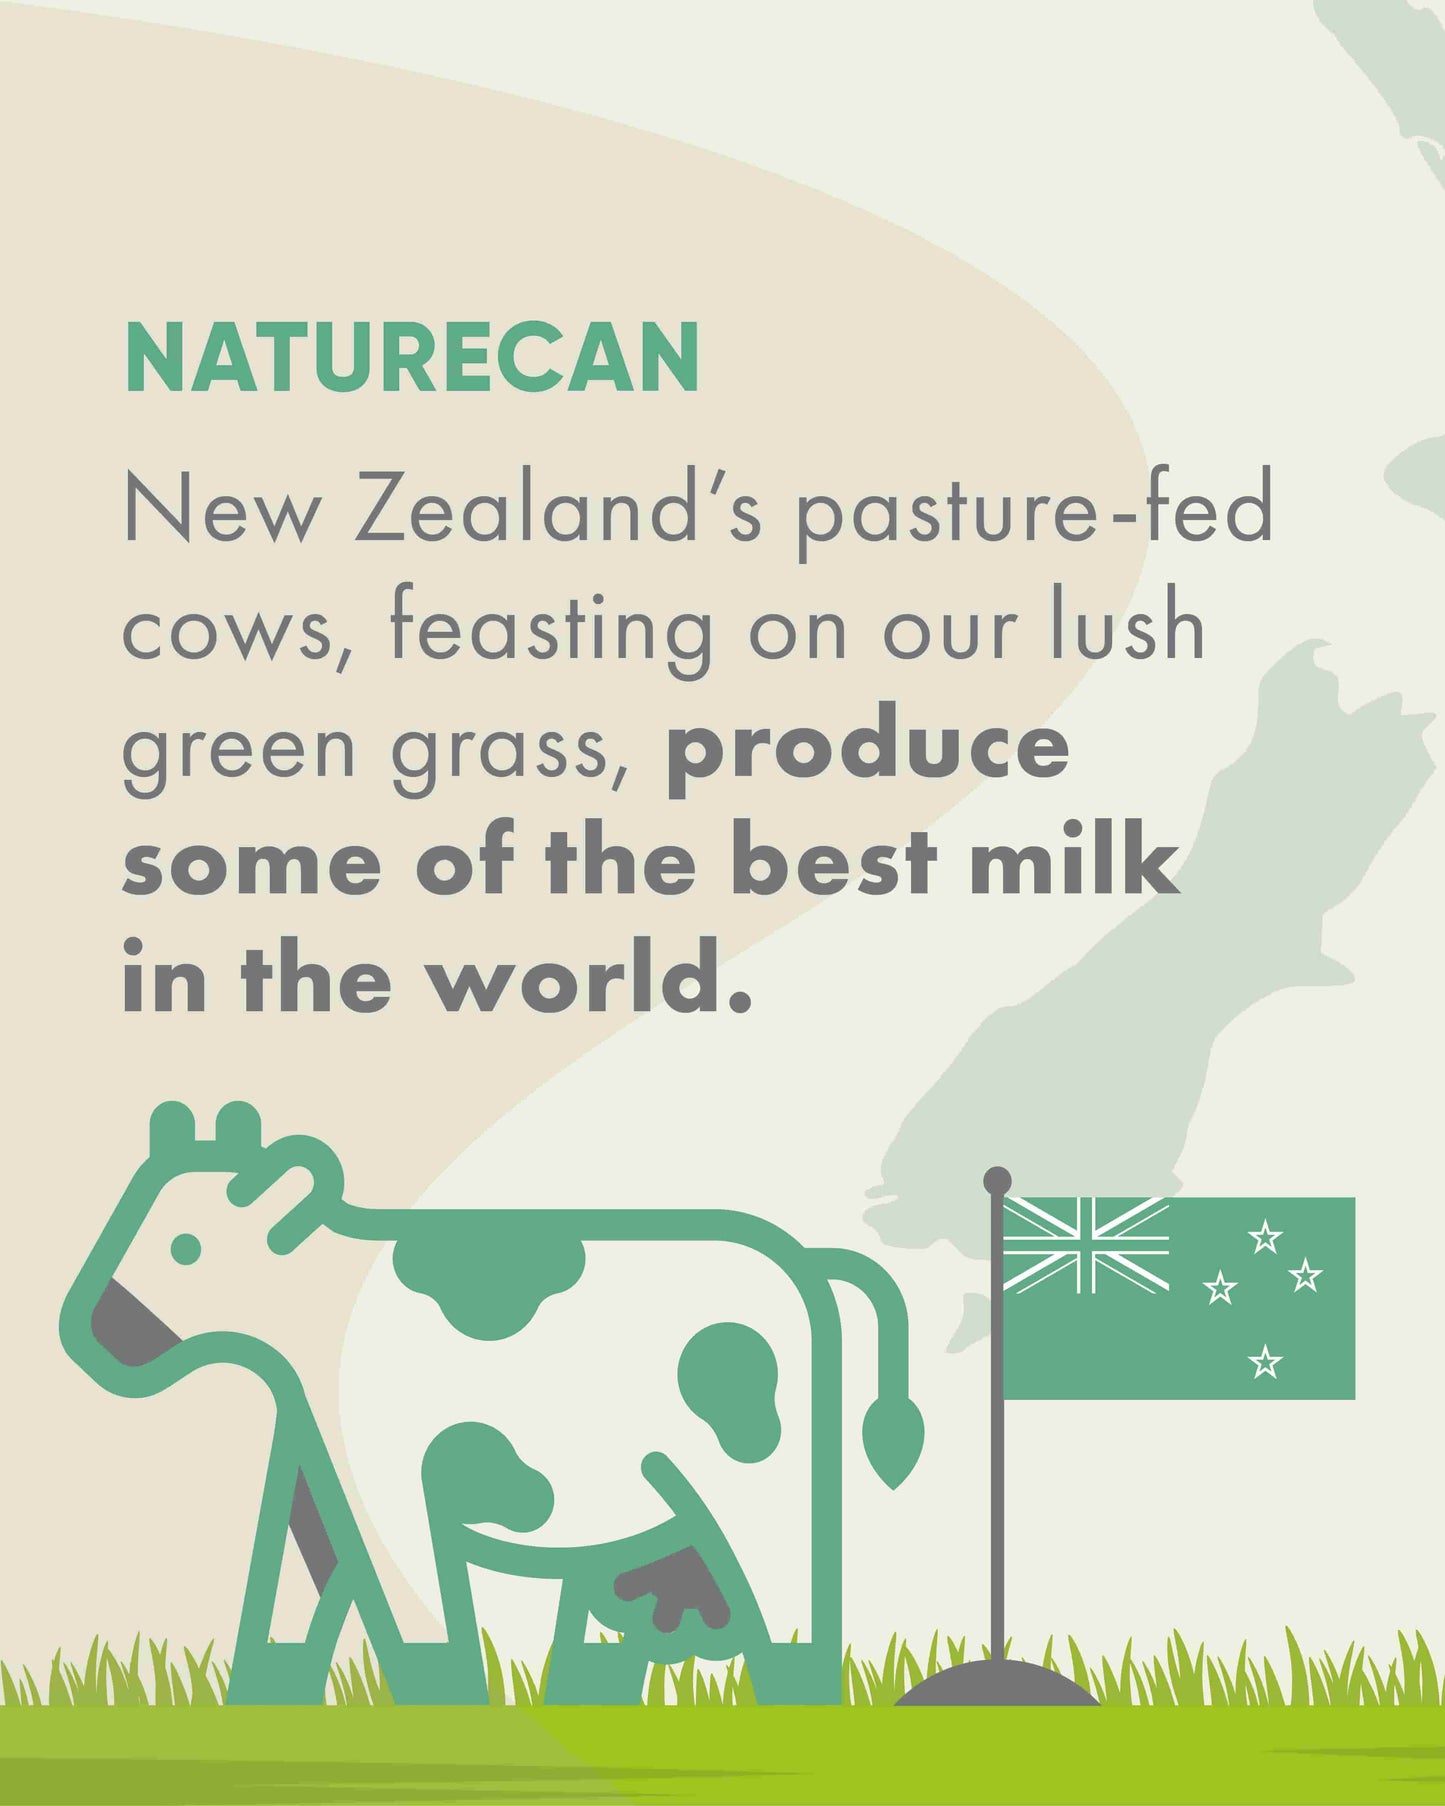 Cows from New Zealand produce the best milk